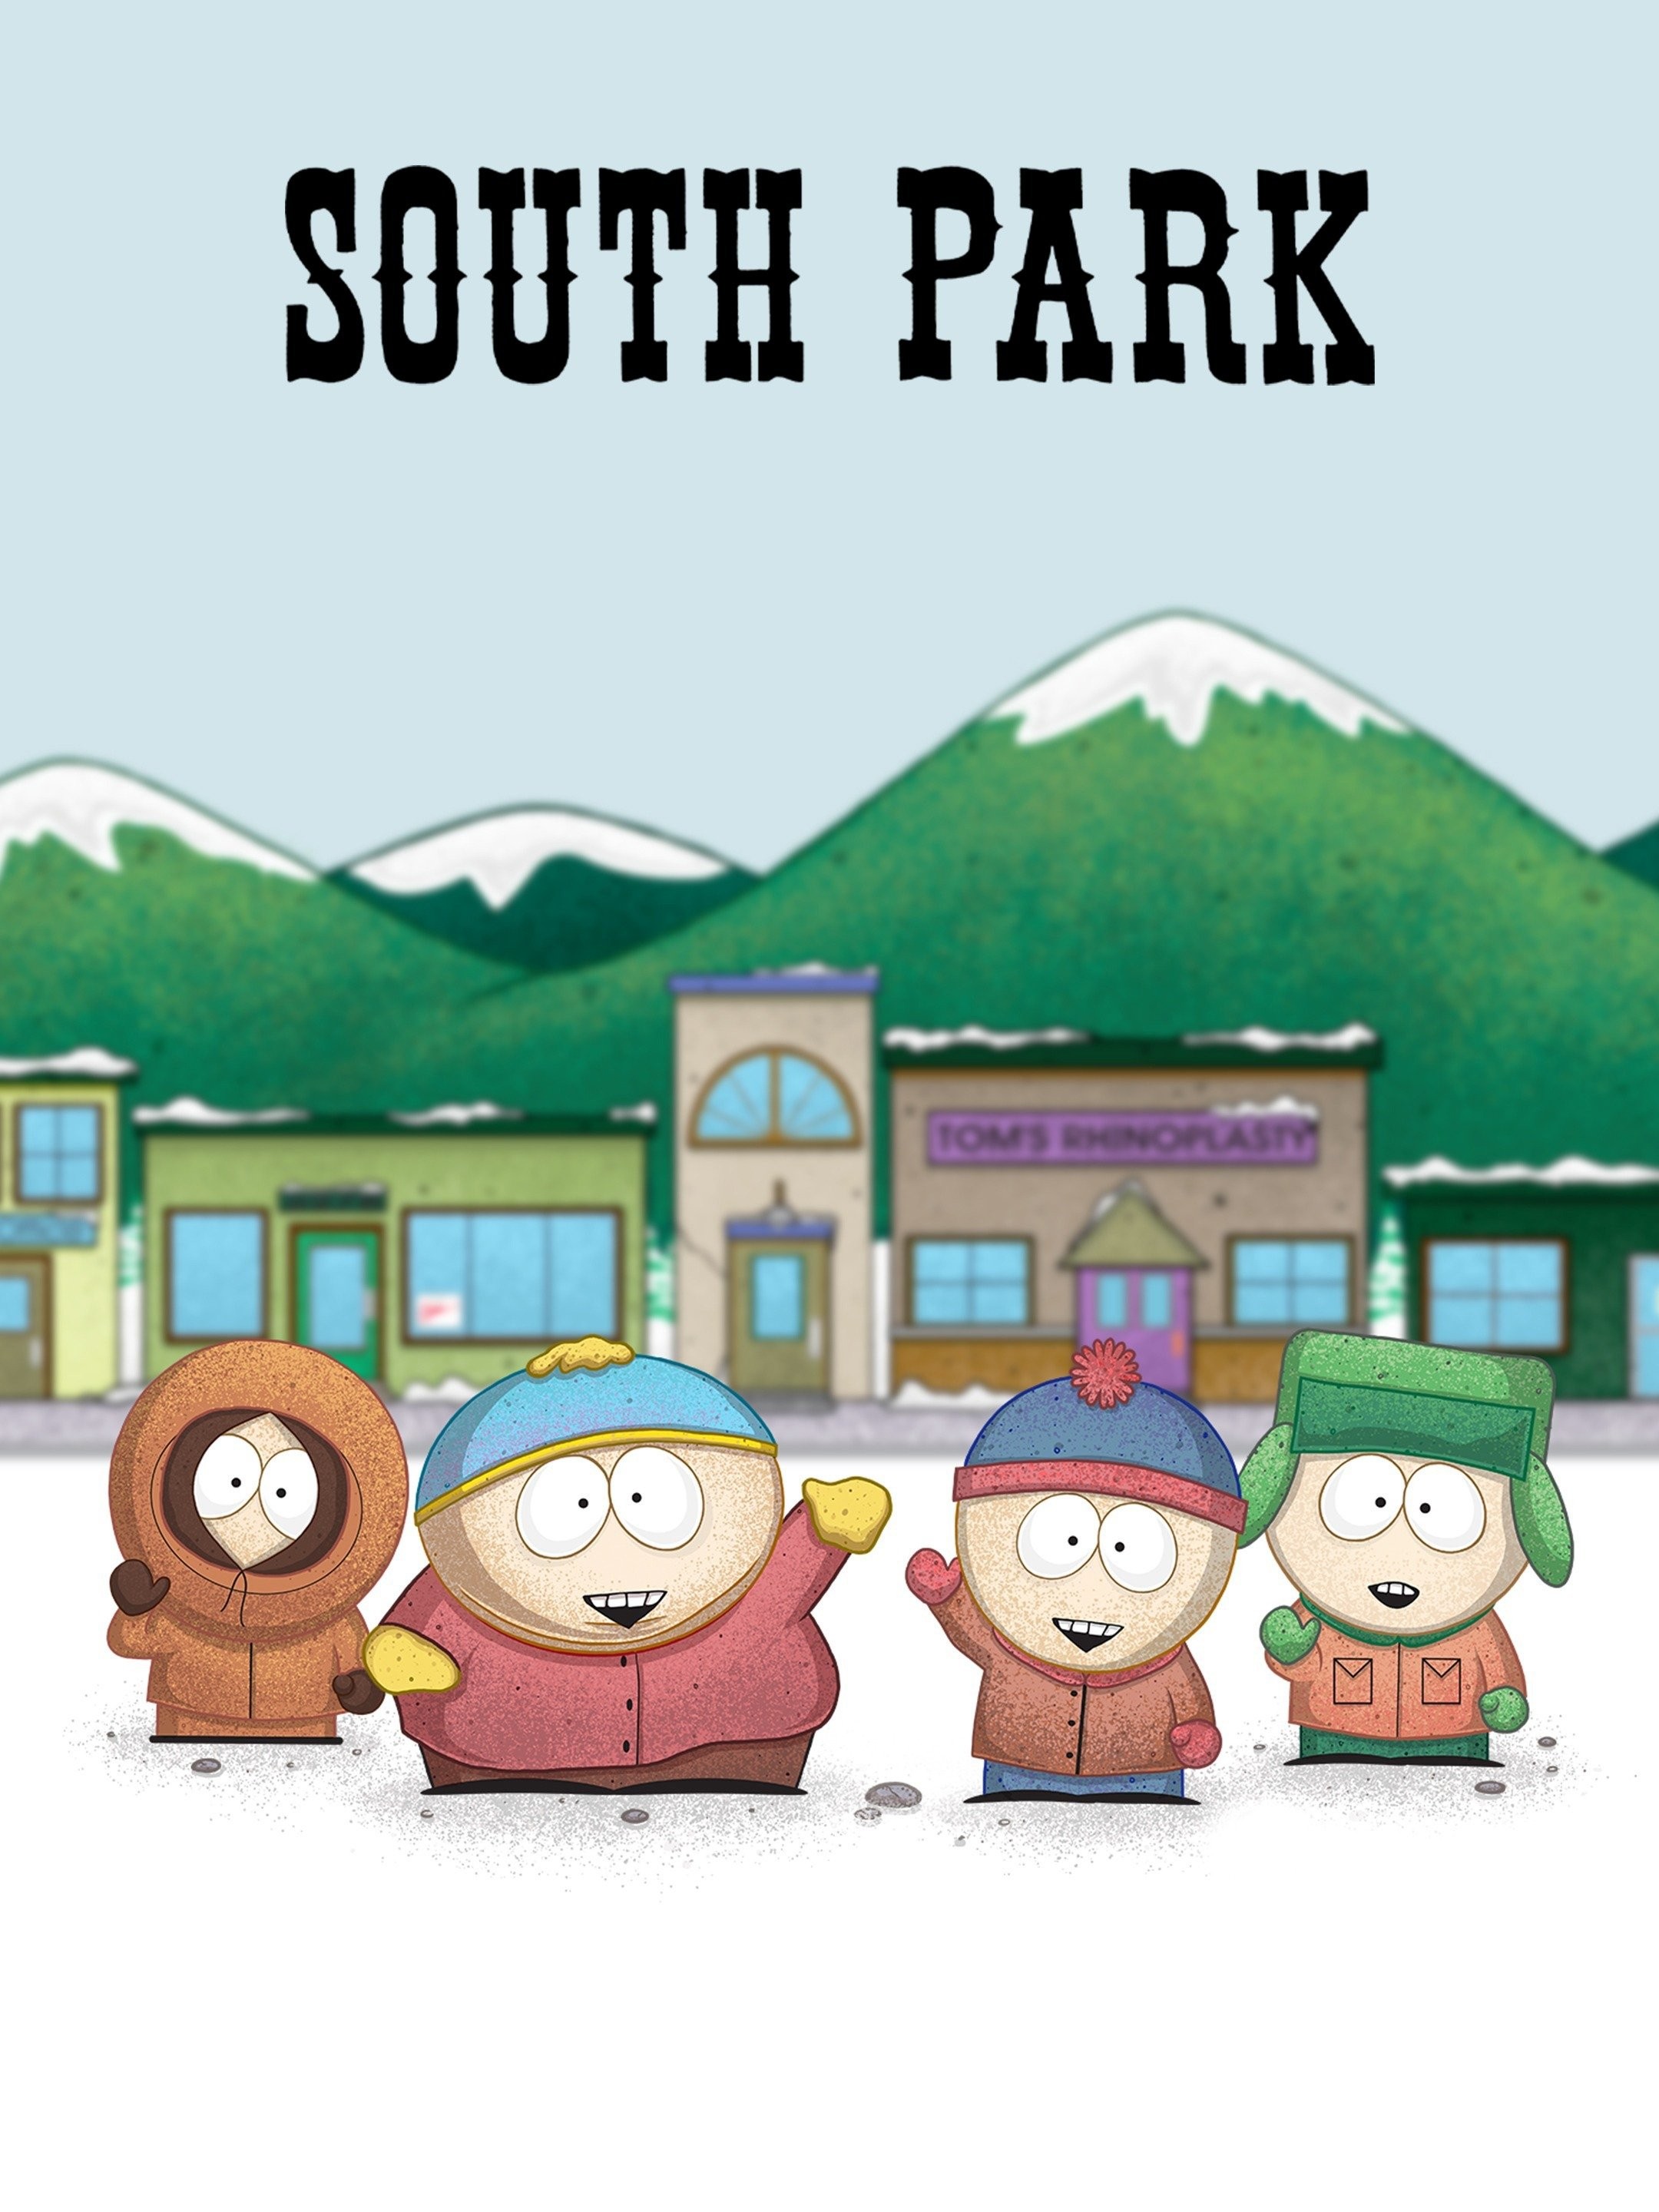 South Park - Watch the all-new Worldwide Privacy Tour